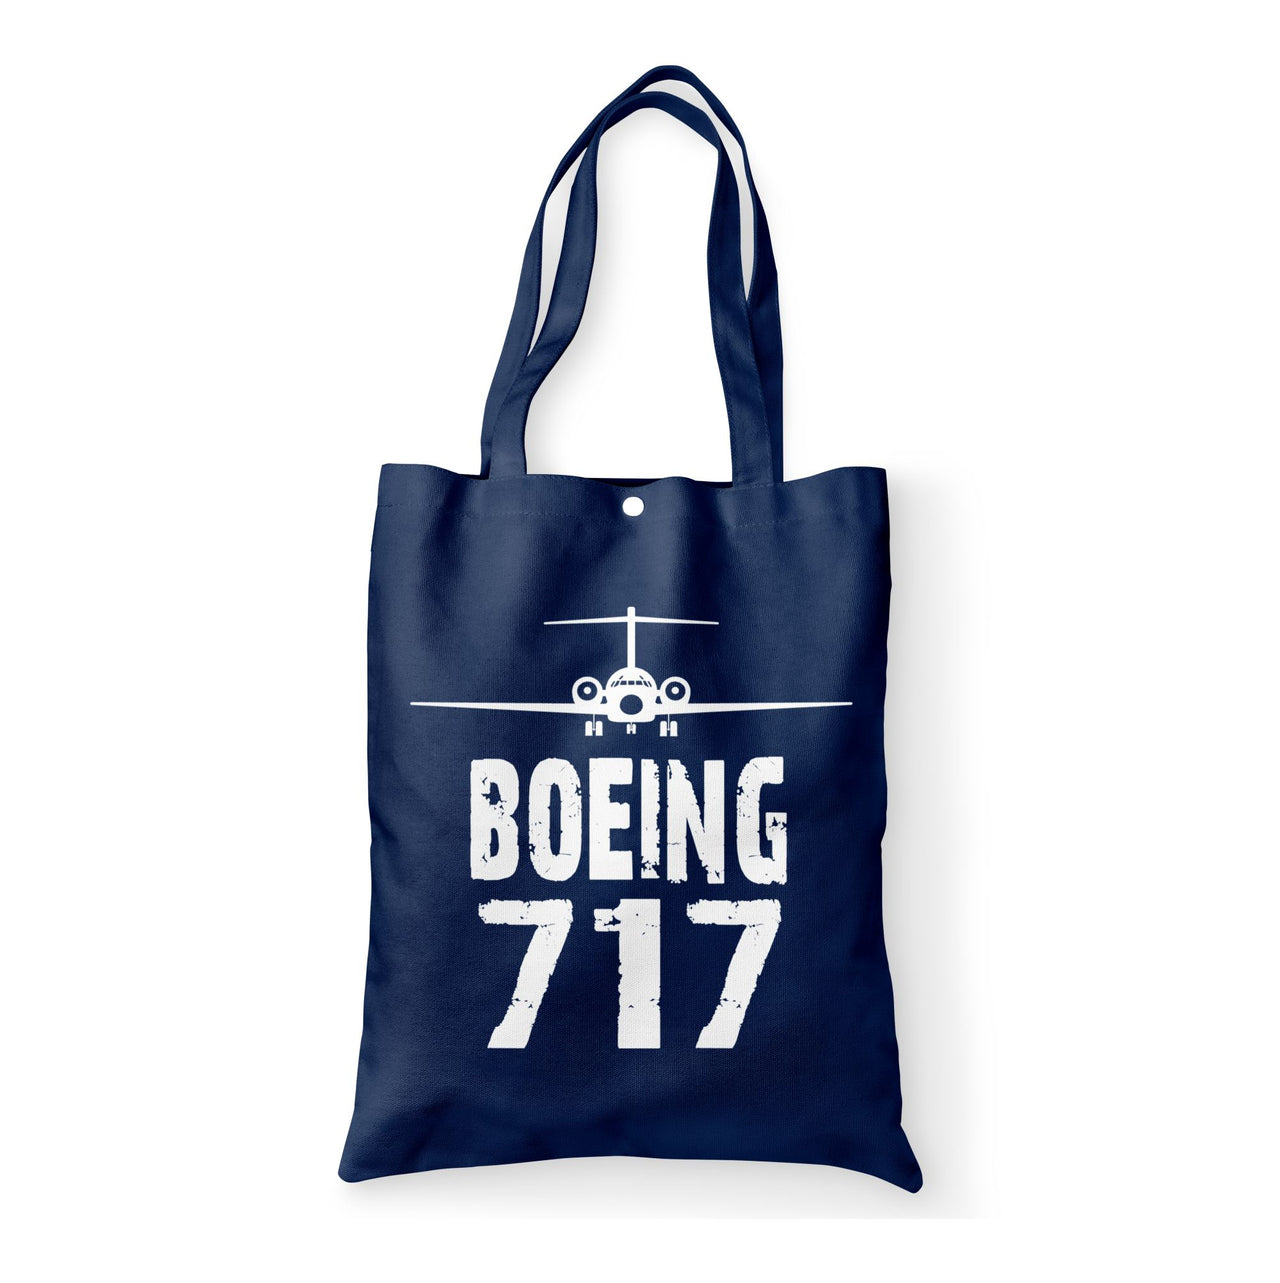 Boeing 717 & Plane Designed Tote Bags